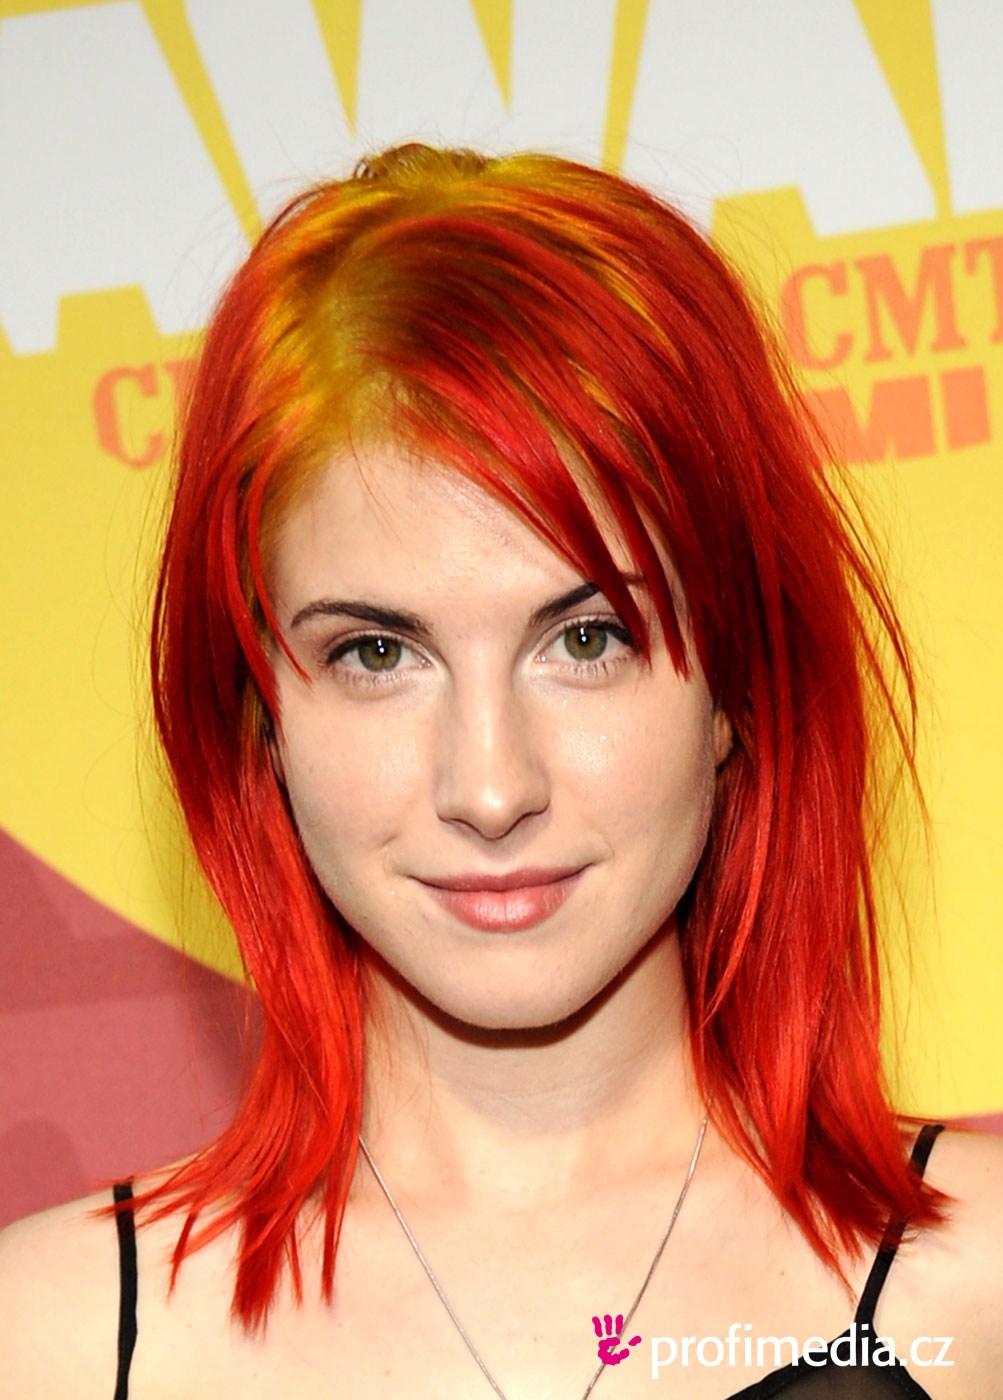 Hd Quality Wallpaper - Hayley Williams , HD Wallpaper & Backgrounds